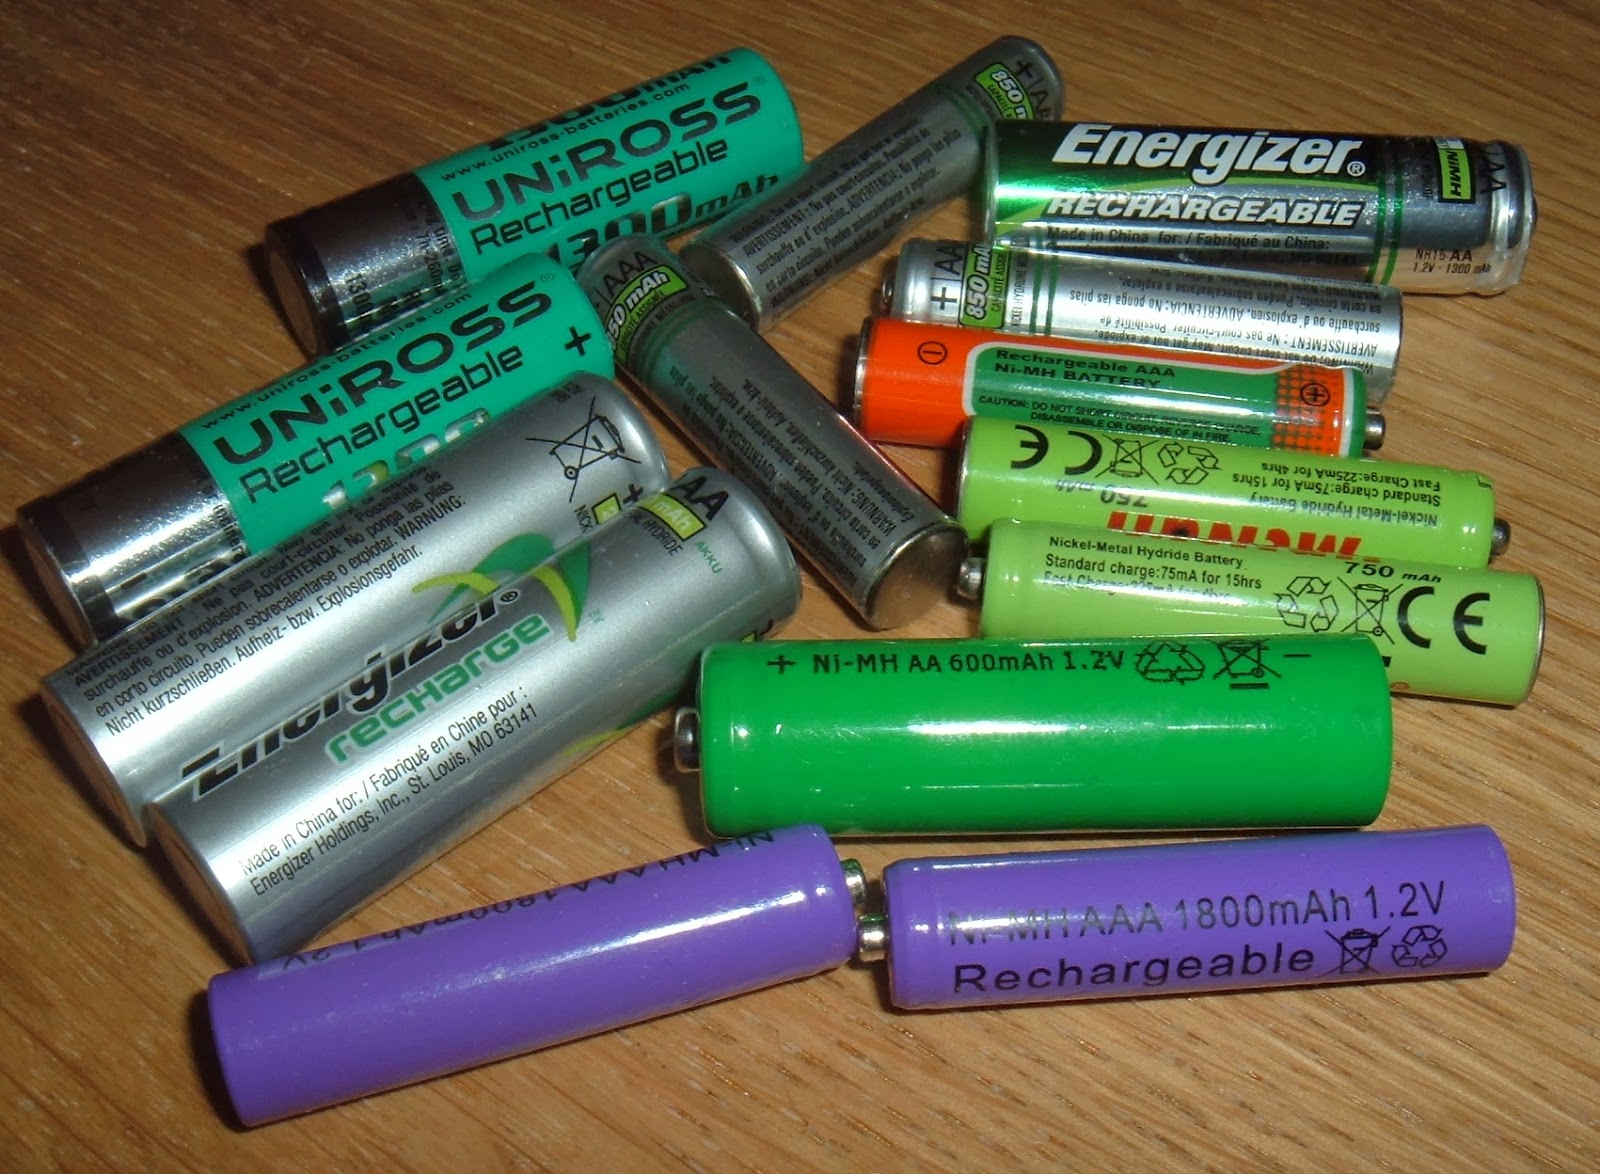 Tynemouth Software: Eneloop Batteries and BL700 Charger Review